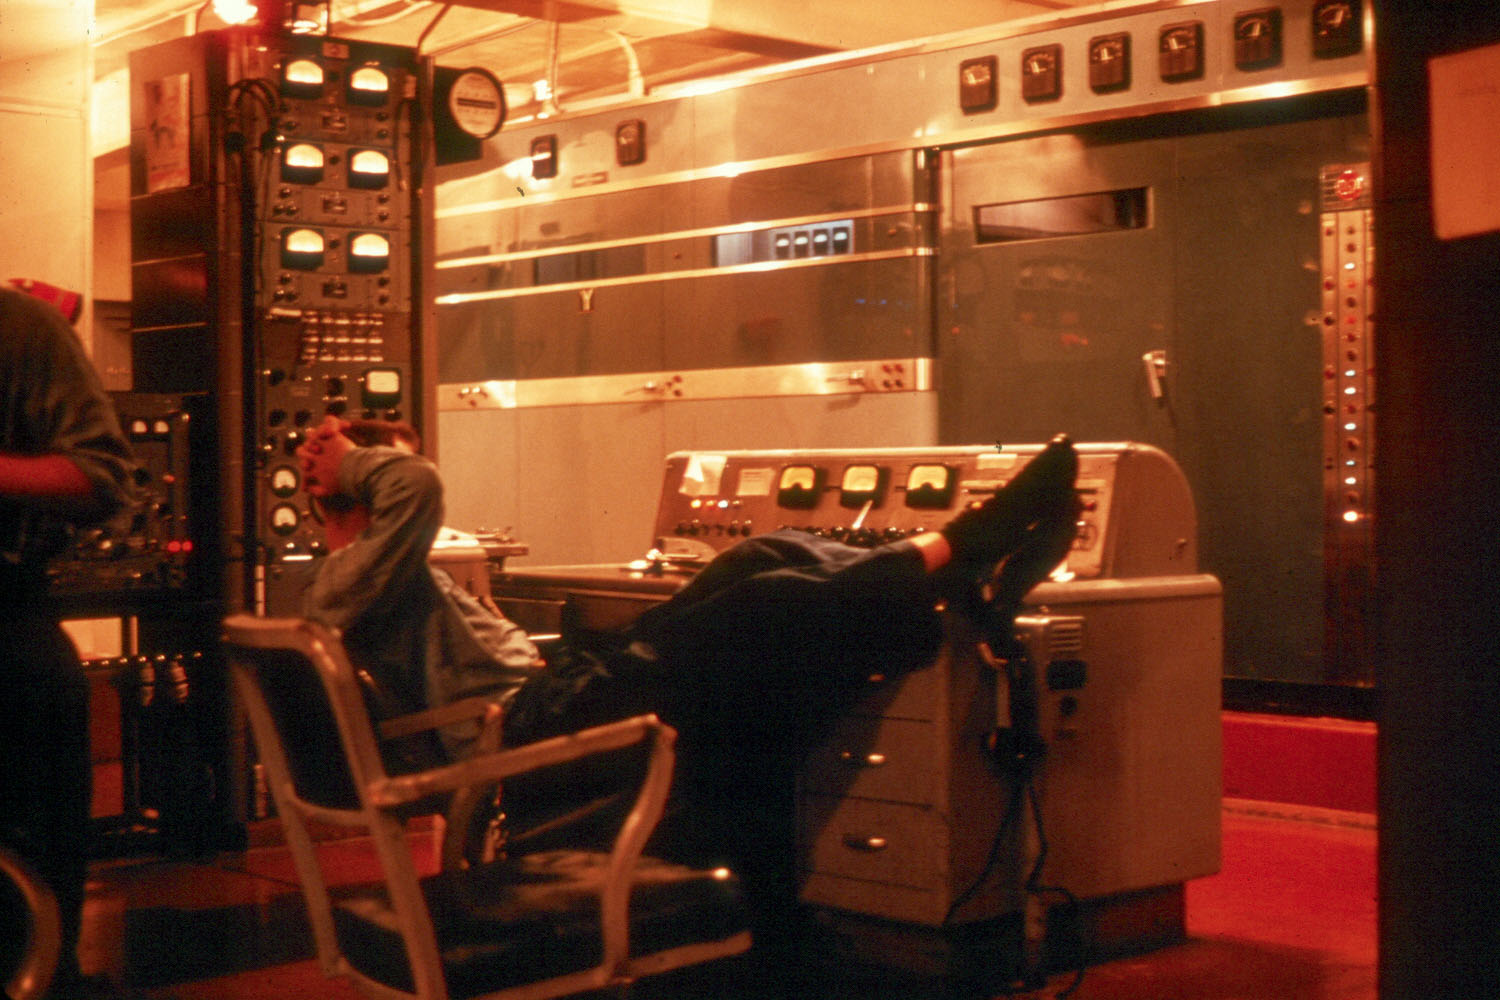 A Coast Guard Cutter Courier electronics technician stands, or perhaps sits, the watch at the controls of the massive 150,000-watt RCA transmitter. (The crew of the Coast Guard Cutter Courier, as collected by the Coast Guard Cutter  Courier/VOA Association)